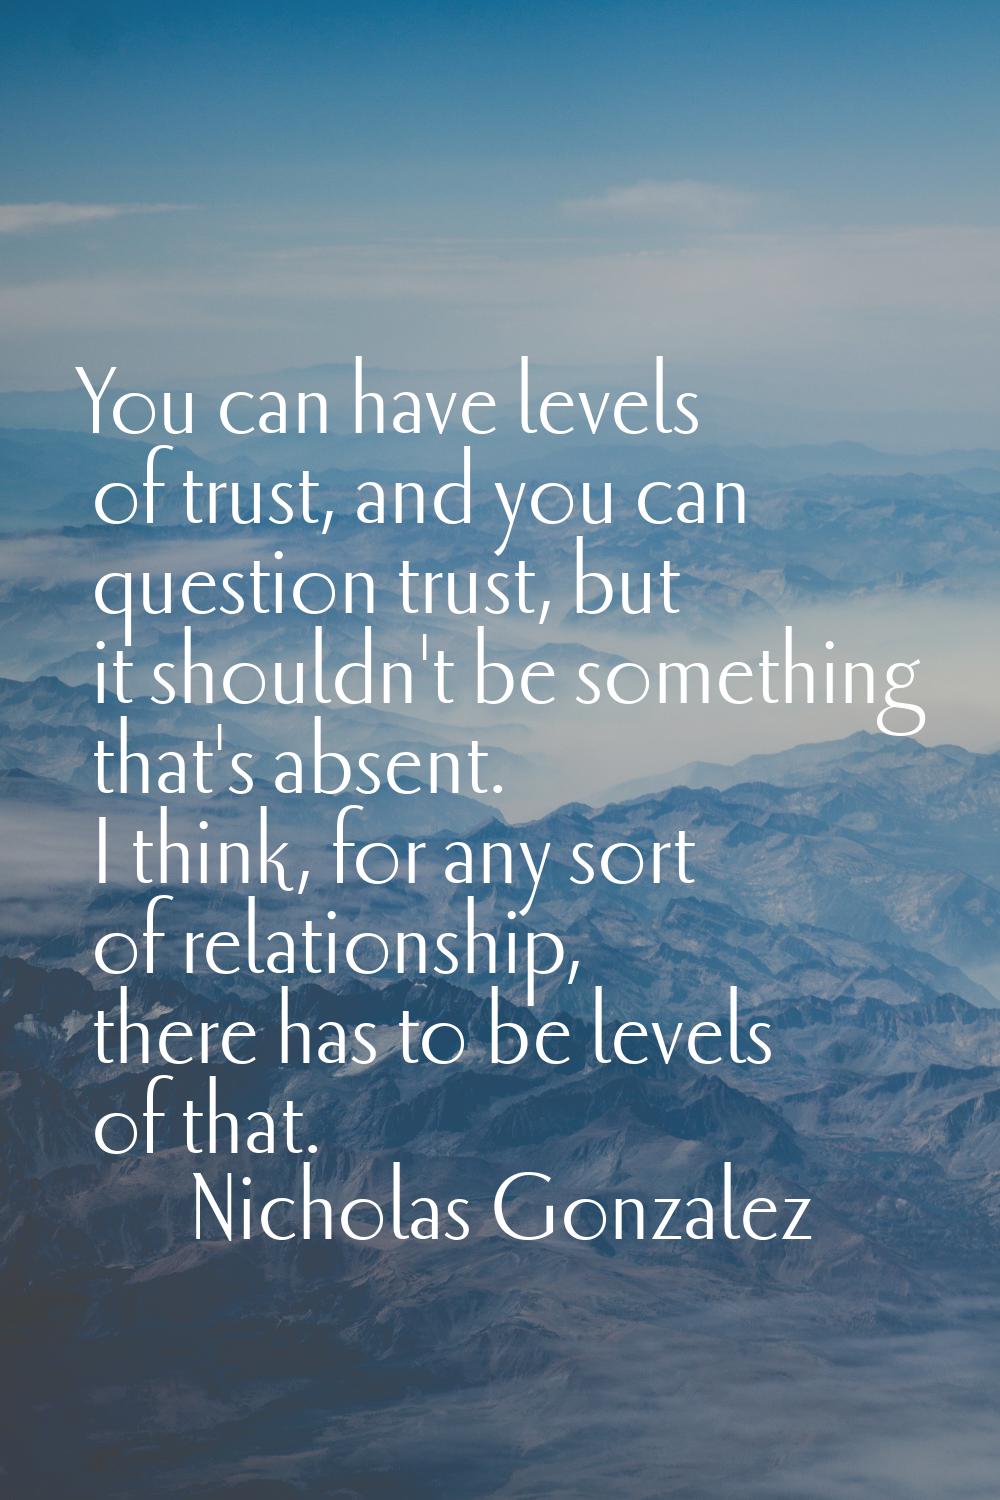 You can have levels of trust, and you can question trust, but it shouldn't be something that's abse